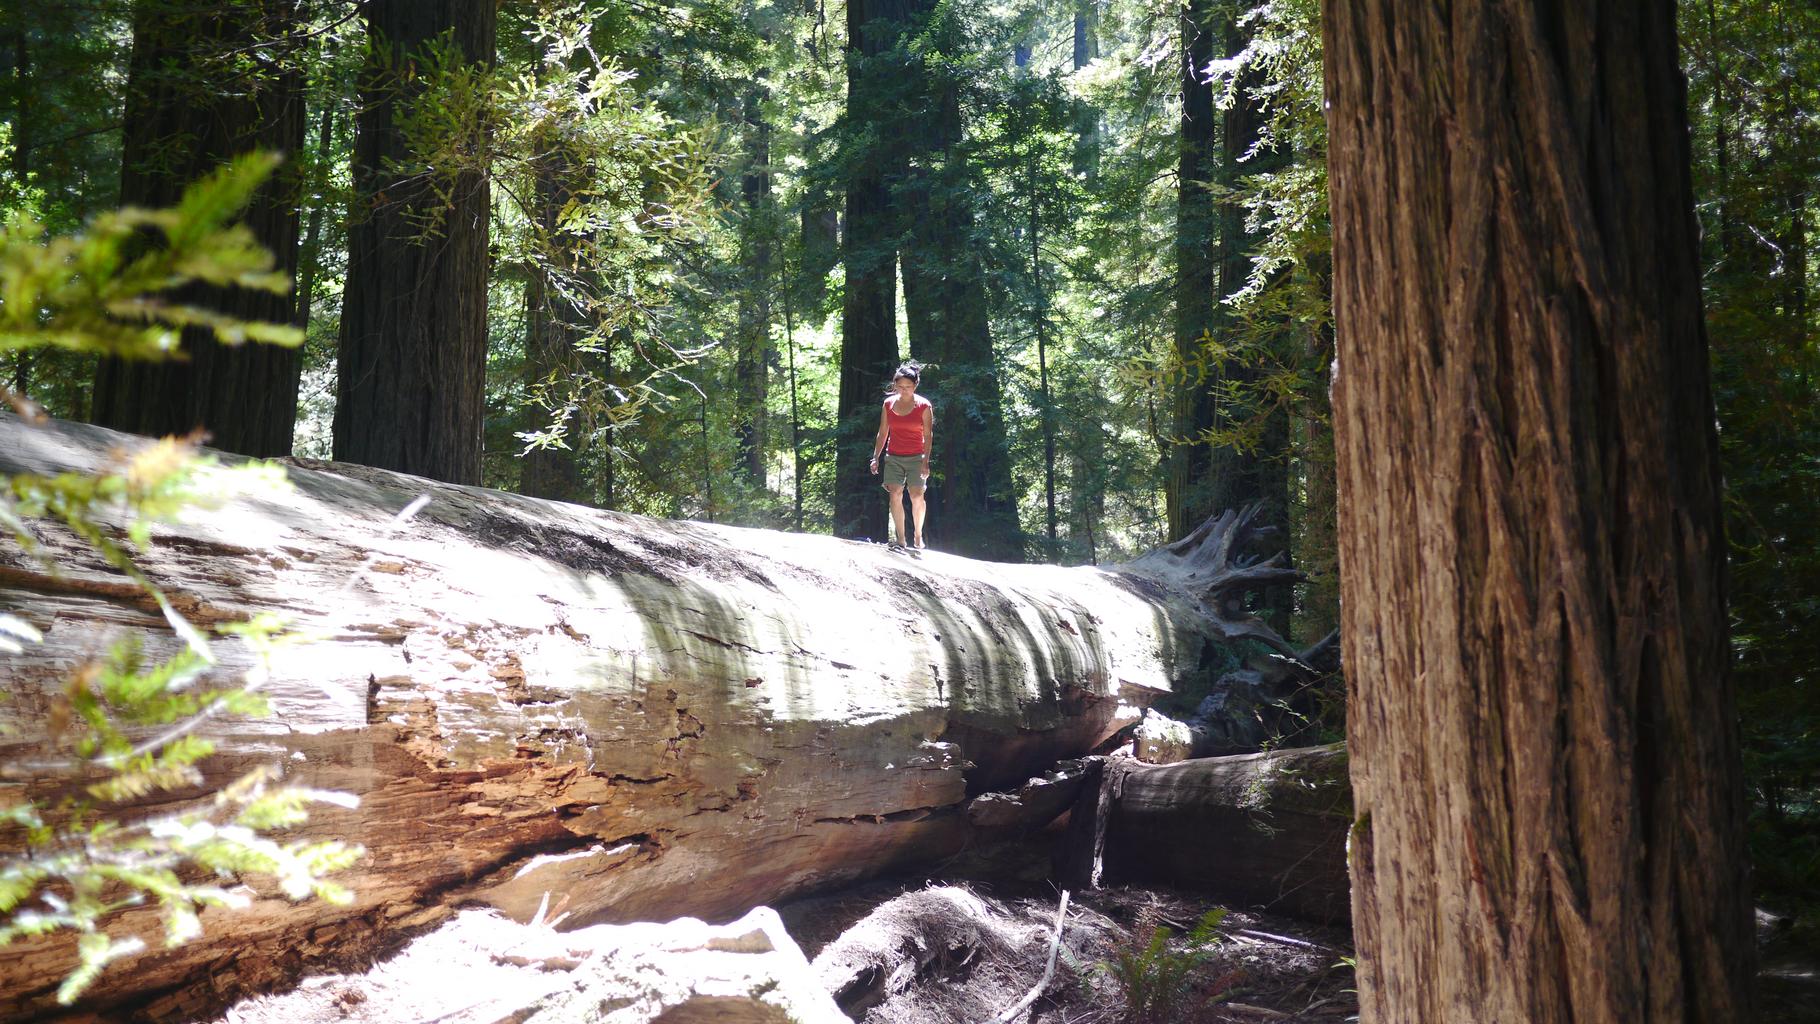 A fallen giant redwood tree in California's Redwood National Park